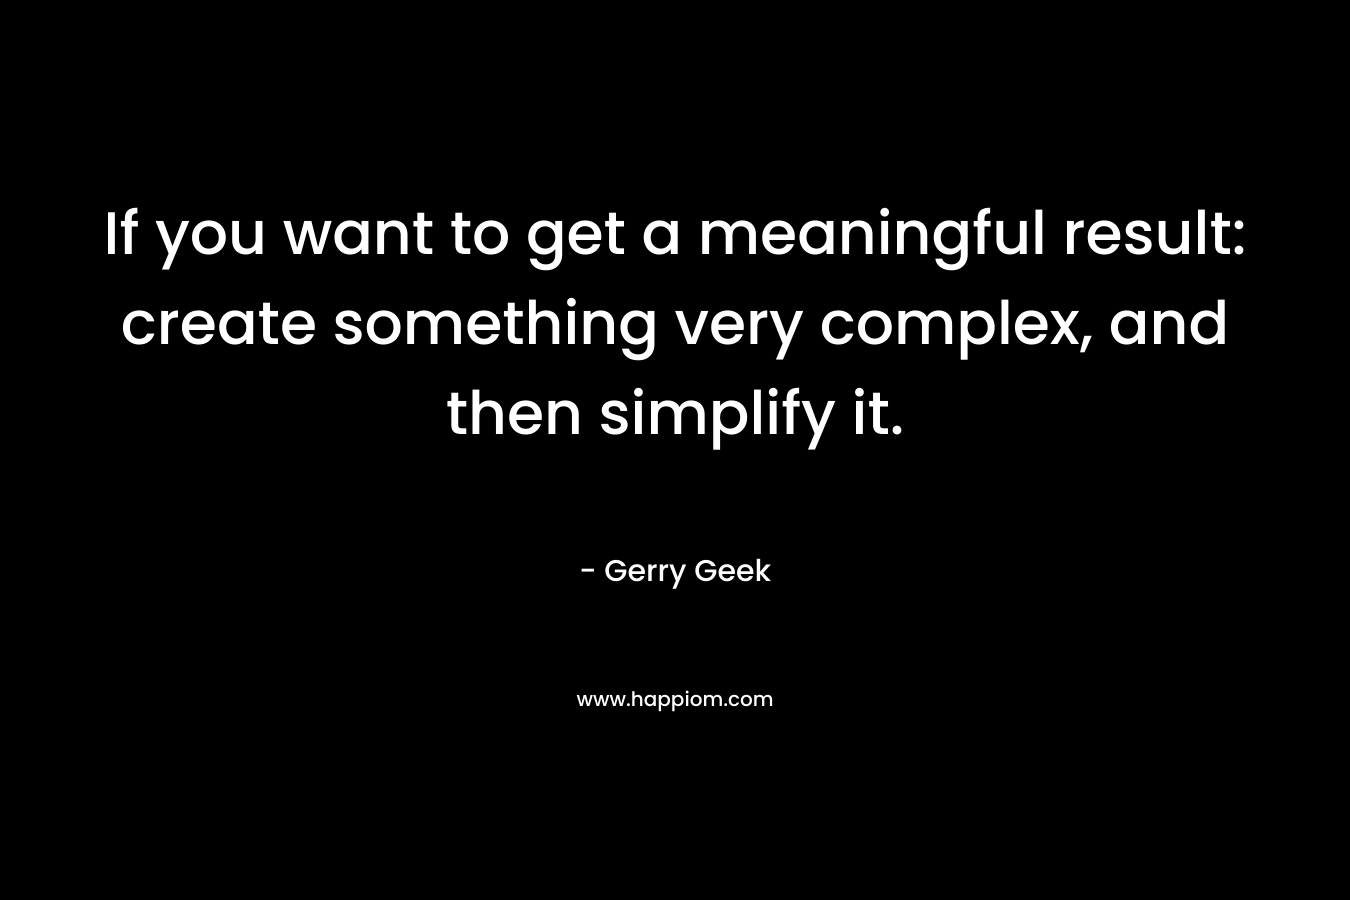 If you want to get a meaningful result: create something very complex, and then simplify it.